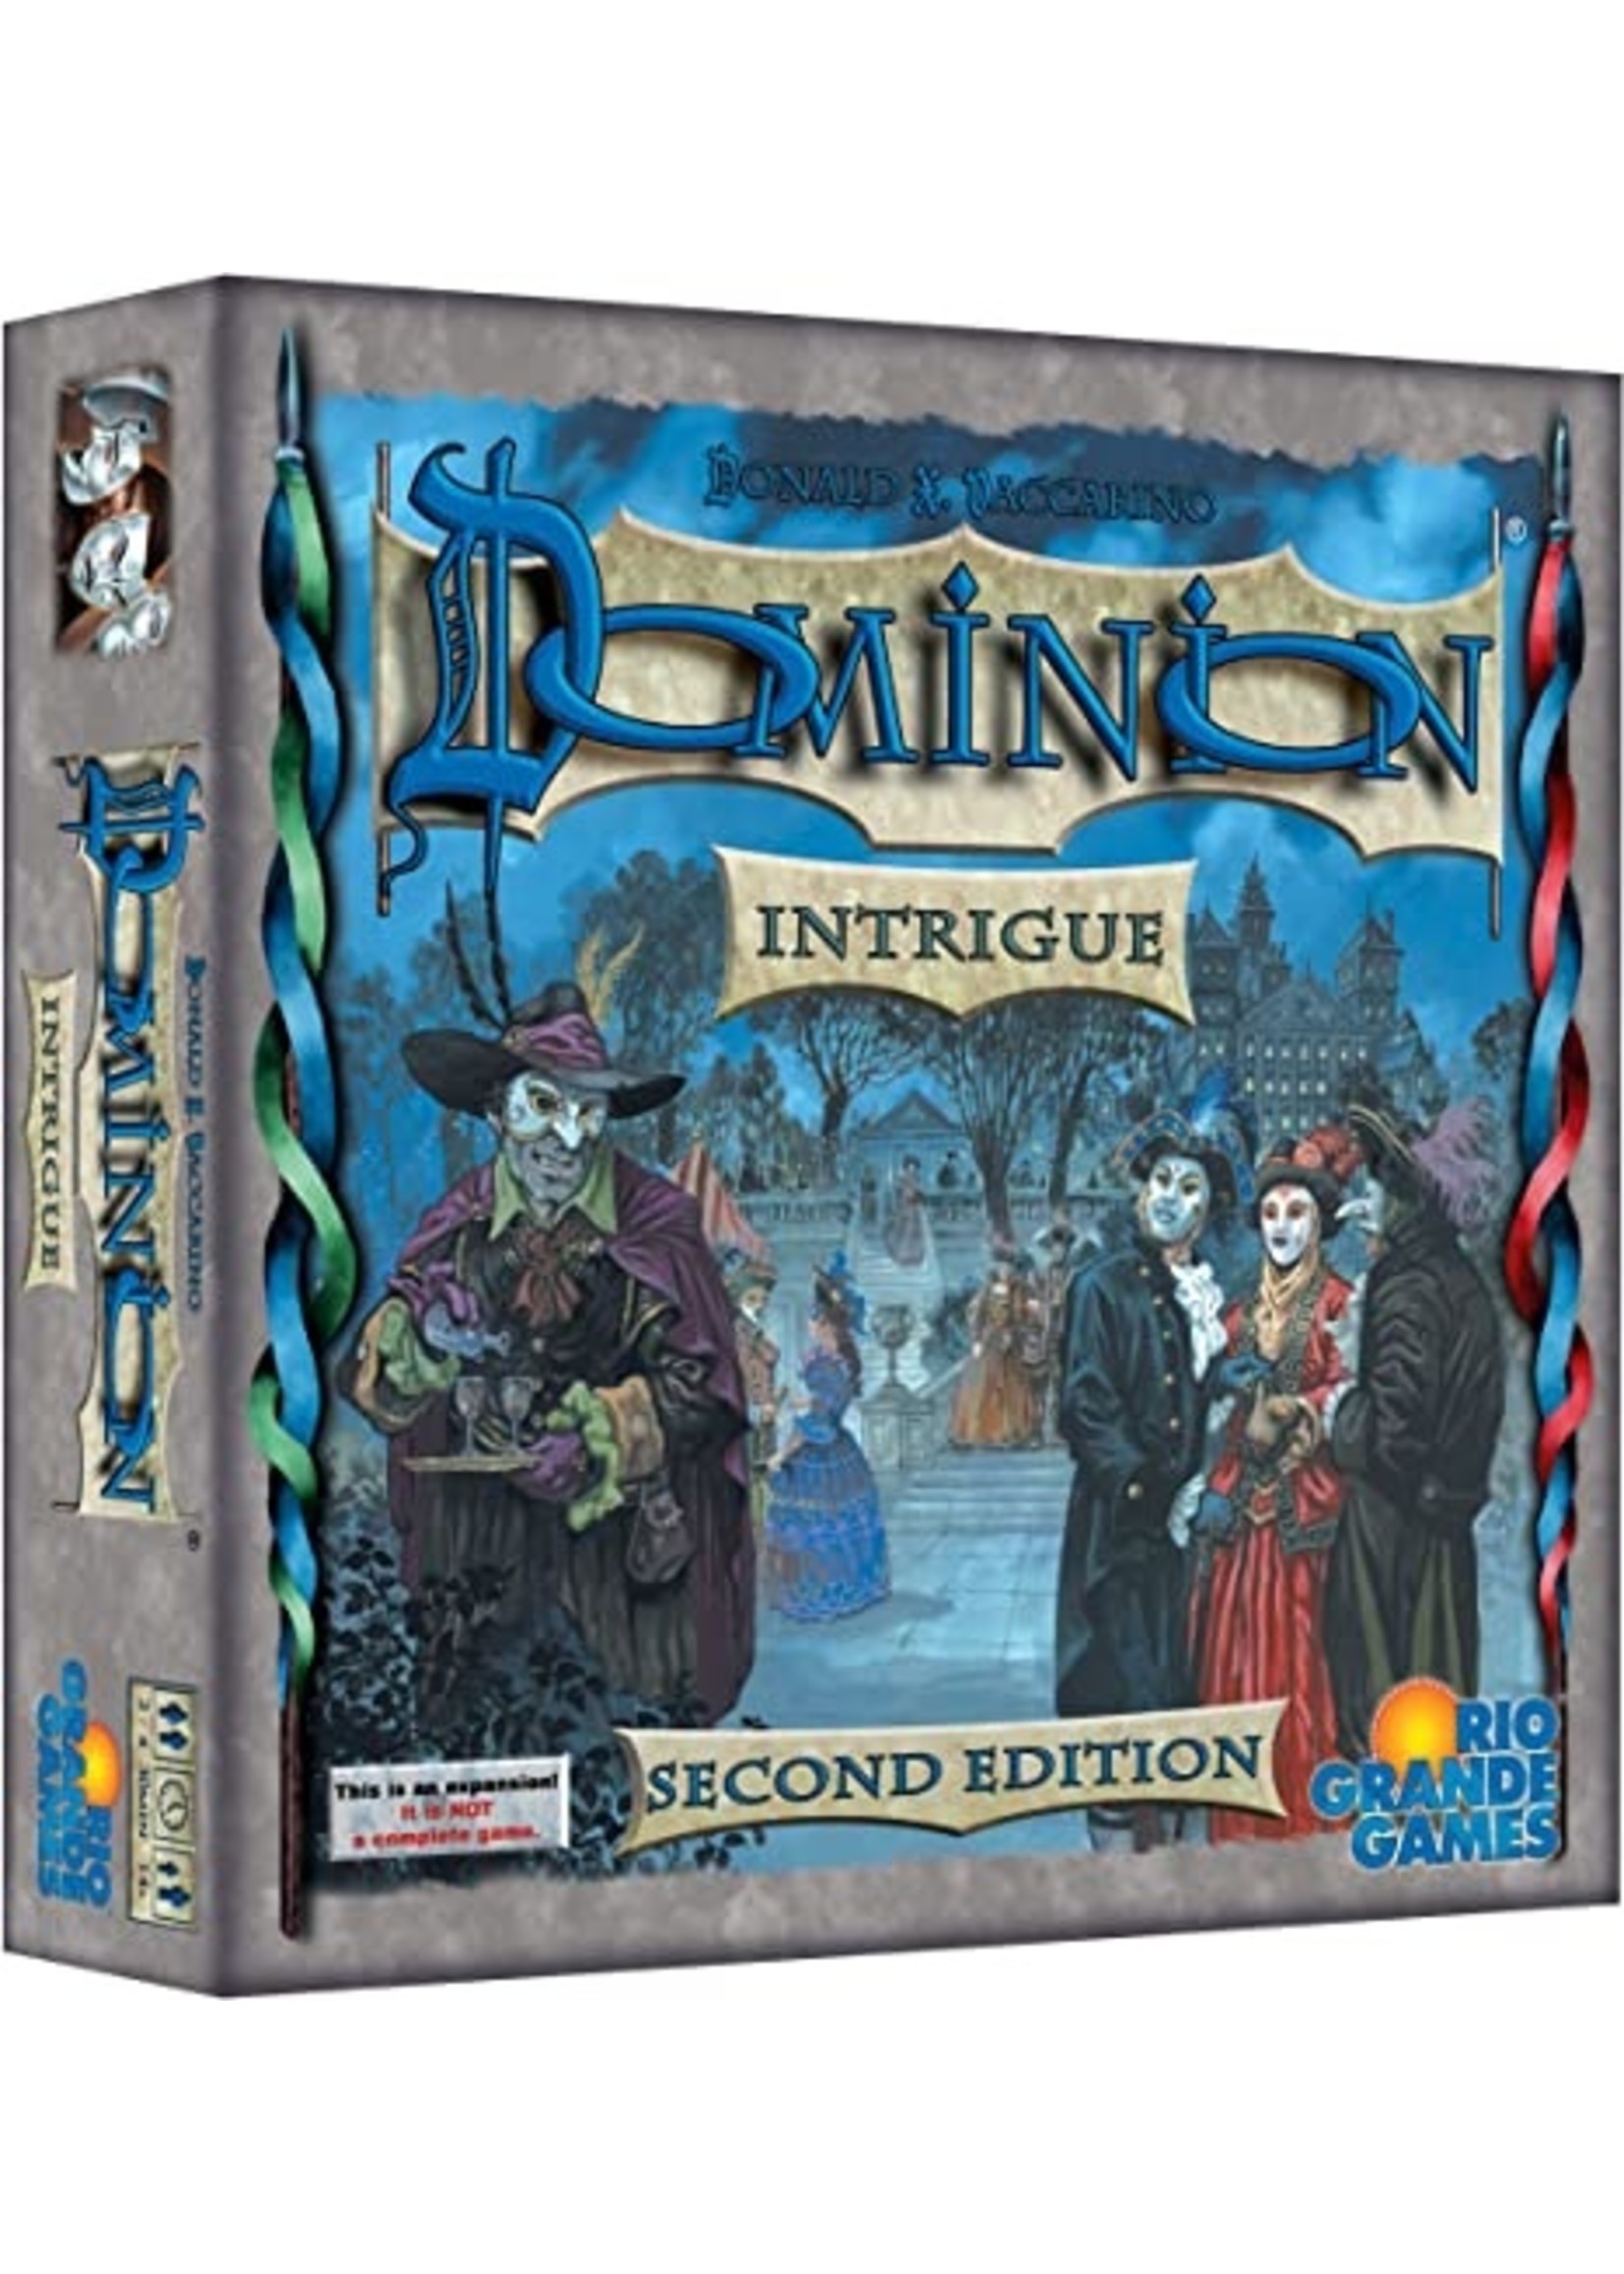 Rio Grande Games Dominion: Intrigue Expansion (2nd Edition)